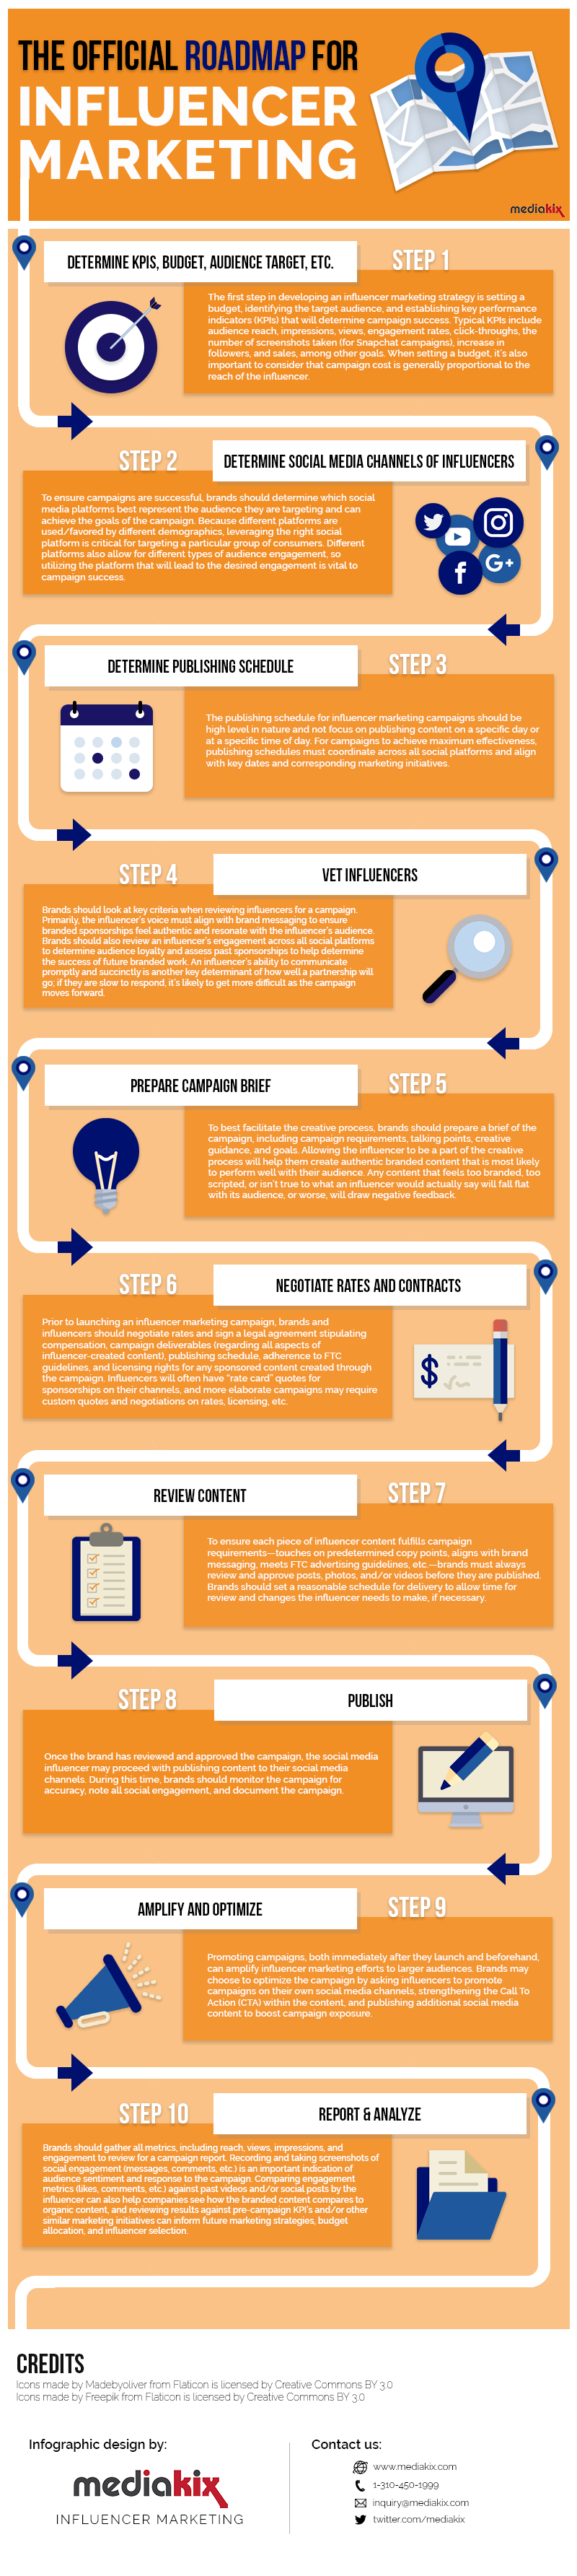 Influencer-Marketing-Infographic-Roadmap-Steps-Guide3